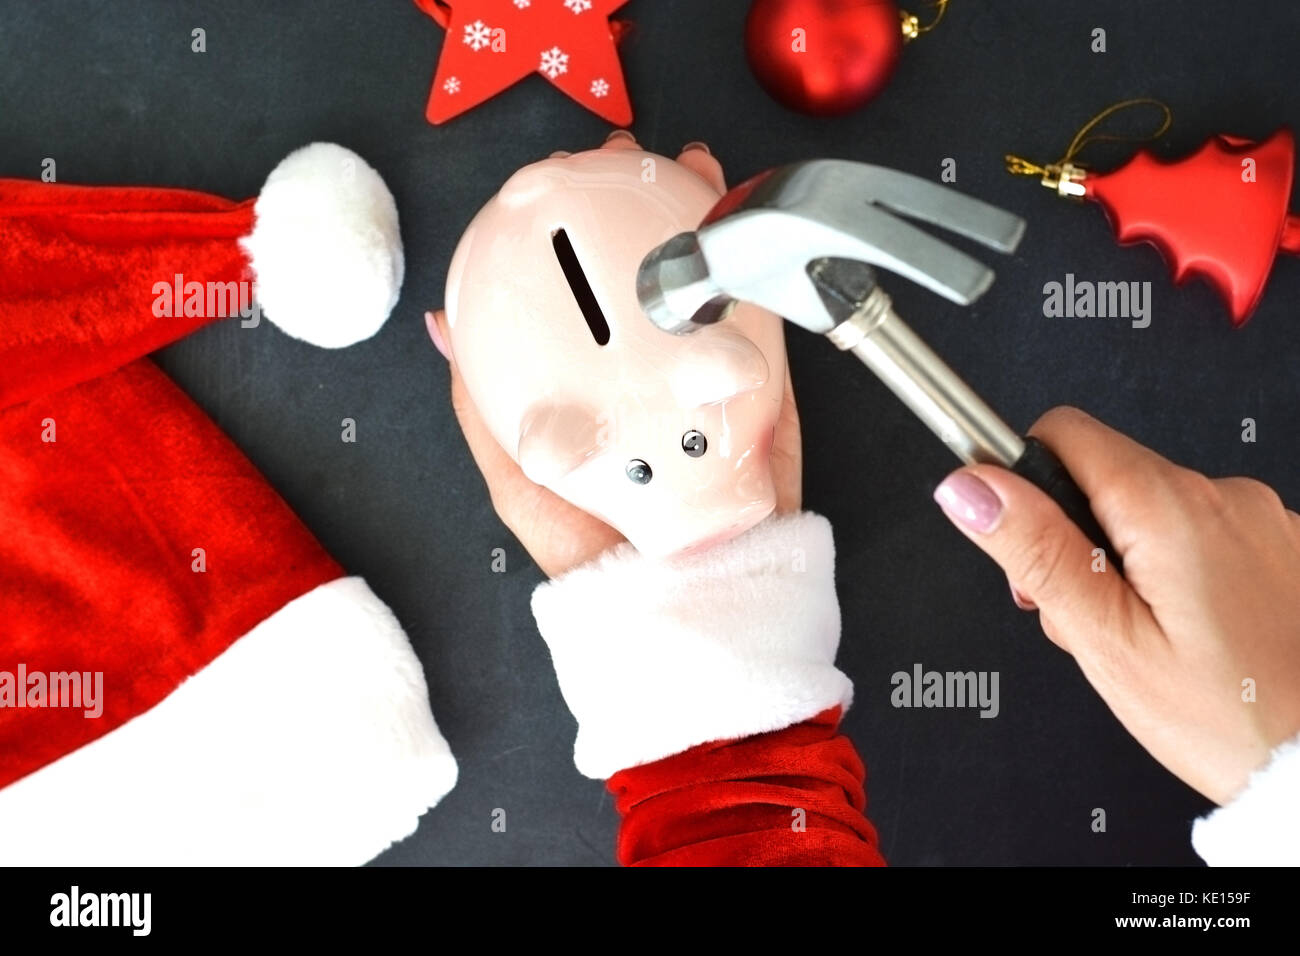 Santa’s helper prepared for high expenses on Christmas time, with piggy bank and hammer on Christmas background Stock Photo